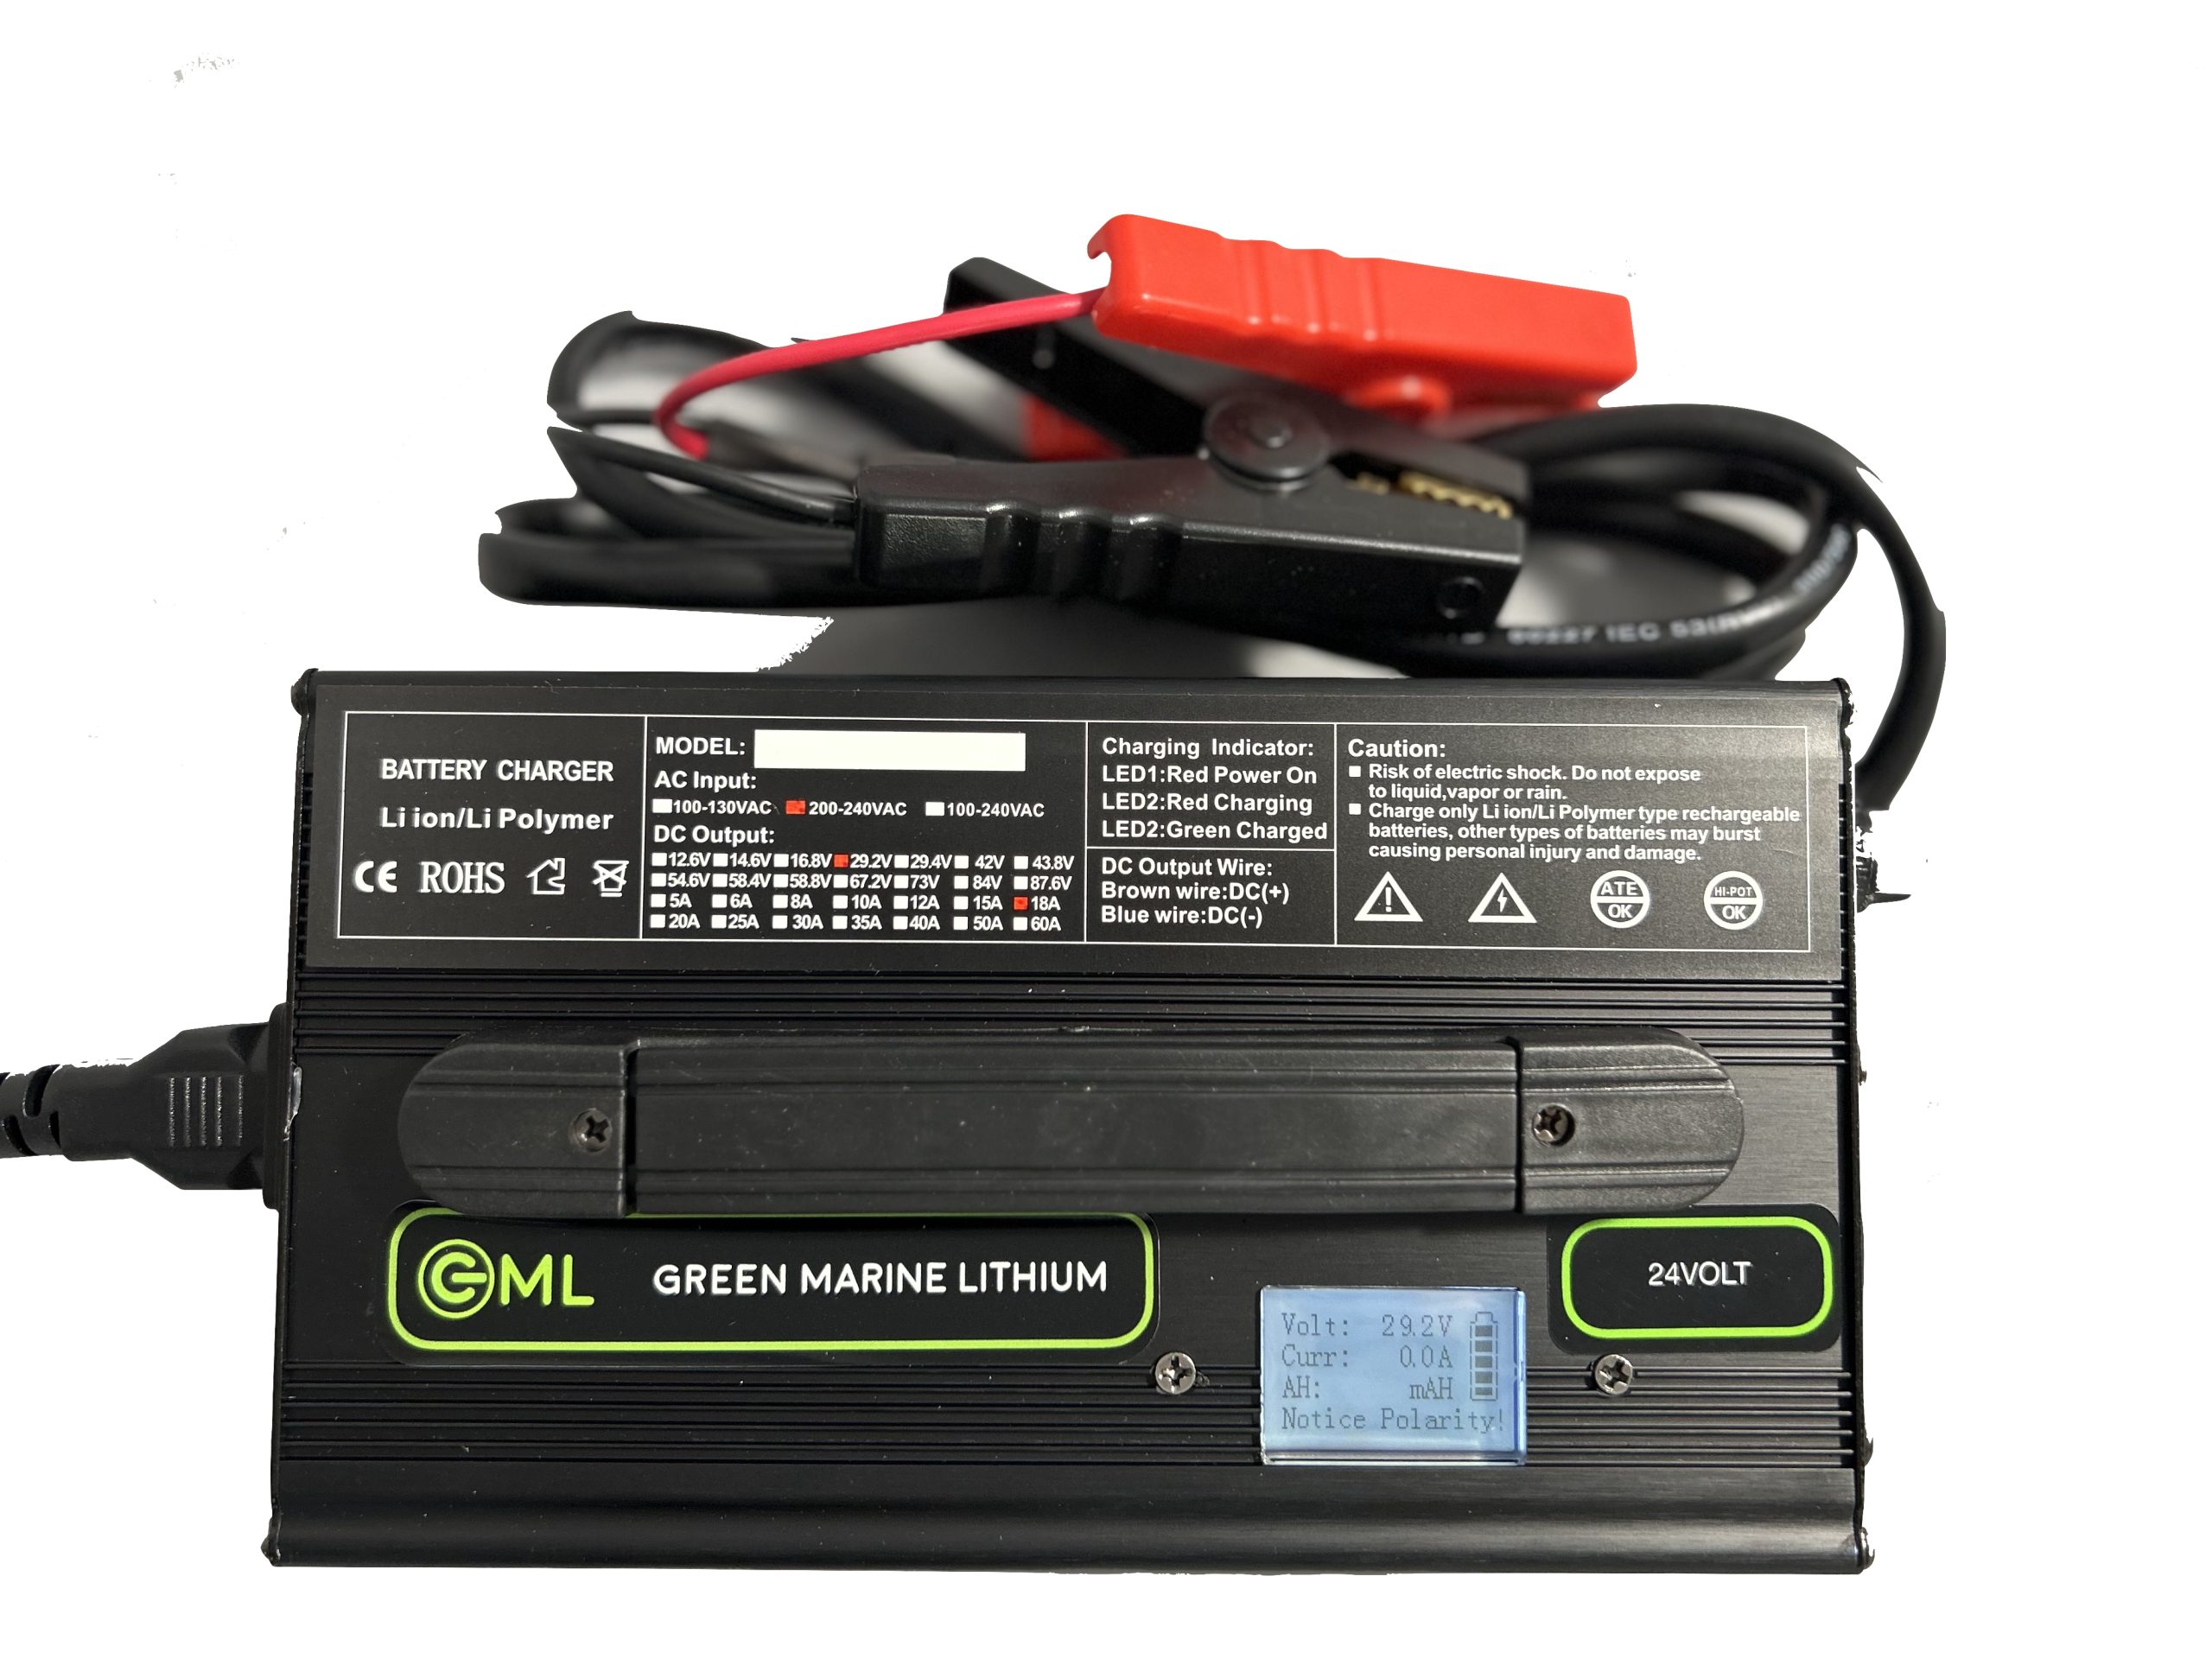 GML 24V 20amp Smart Fast Lithium Charger ac/dc